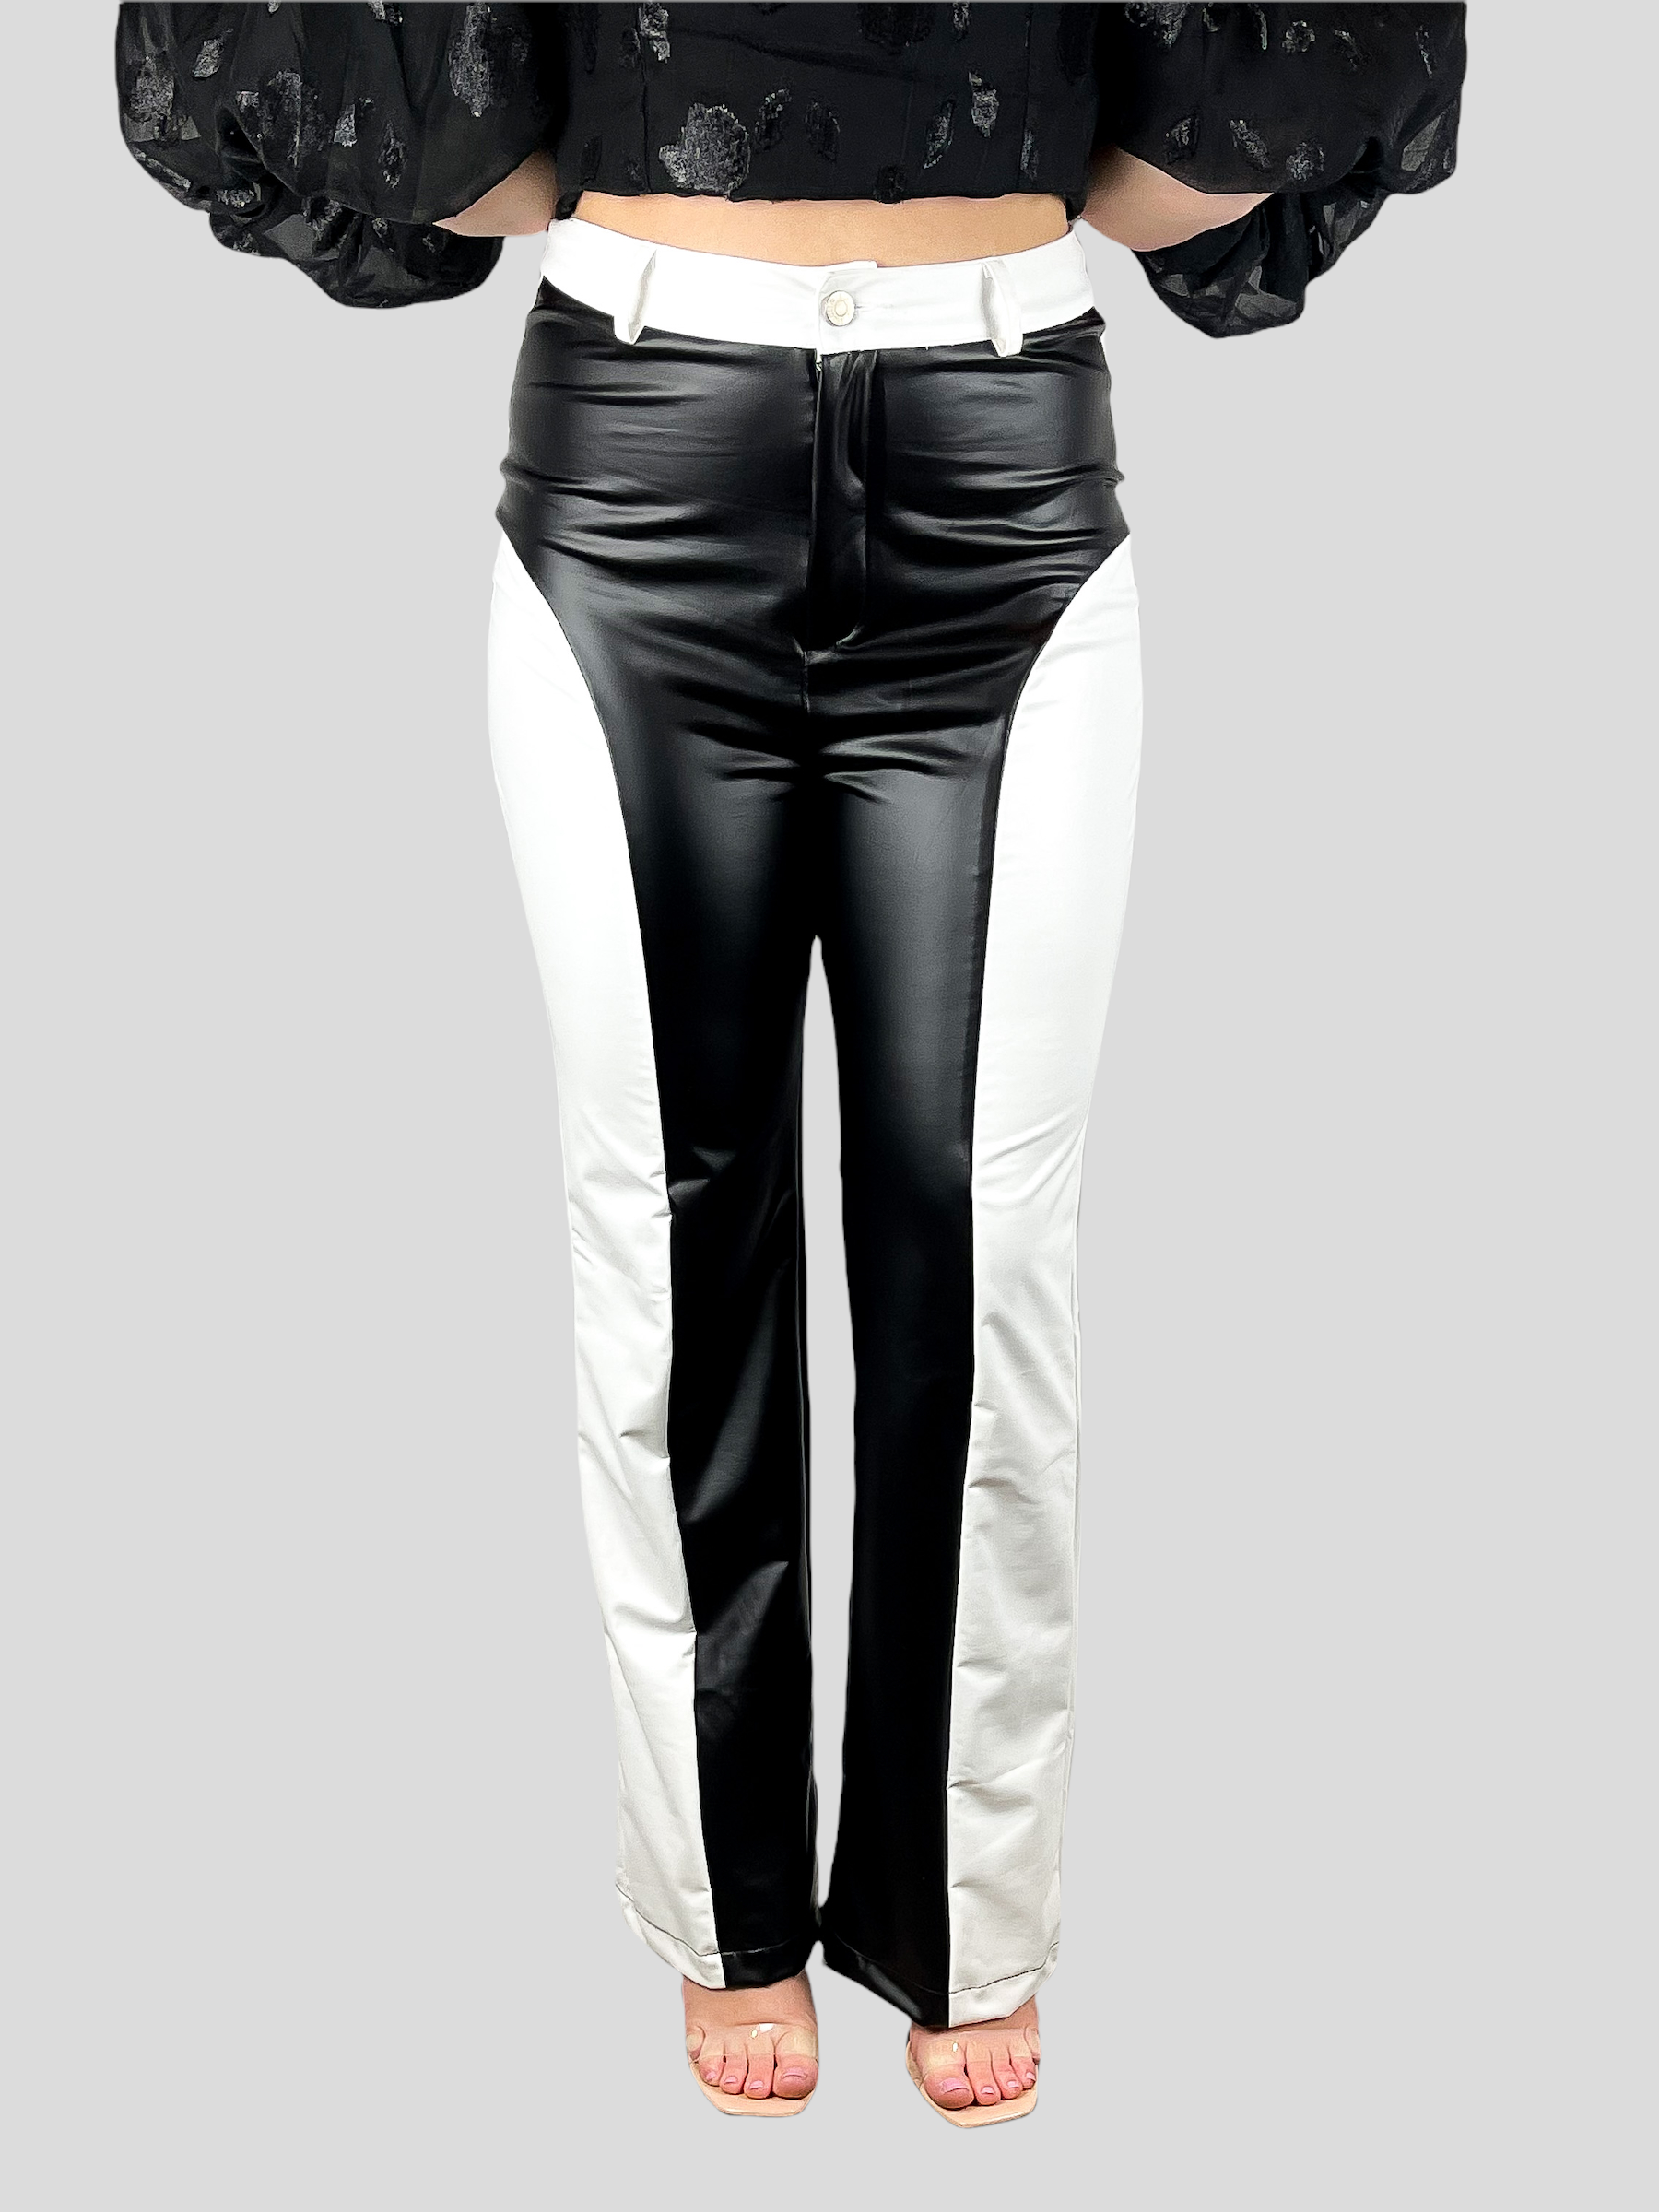 How To Wear Leather Pants This Summer, Inspired By Gwyneth Paltrow's Pair